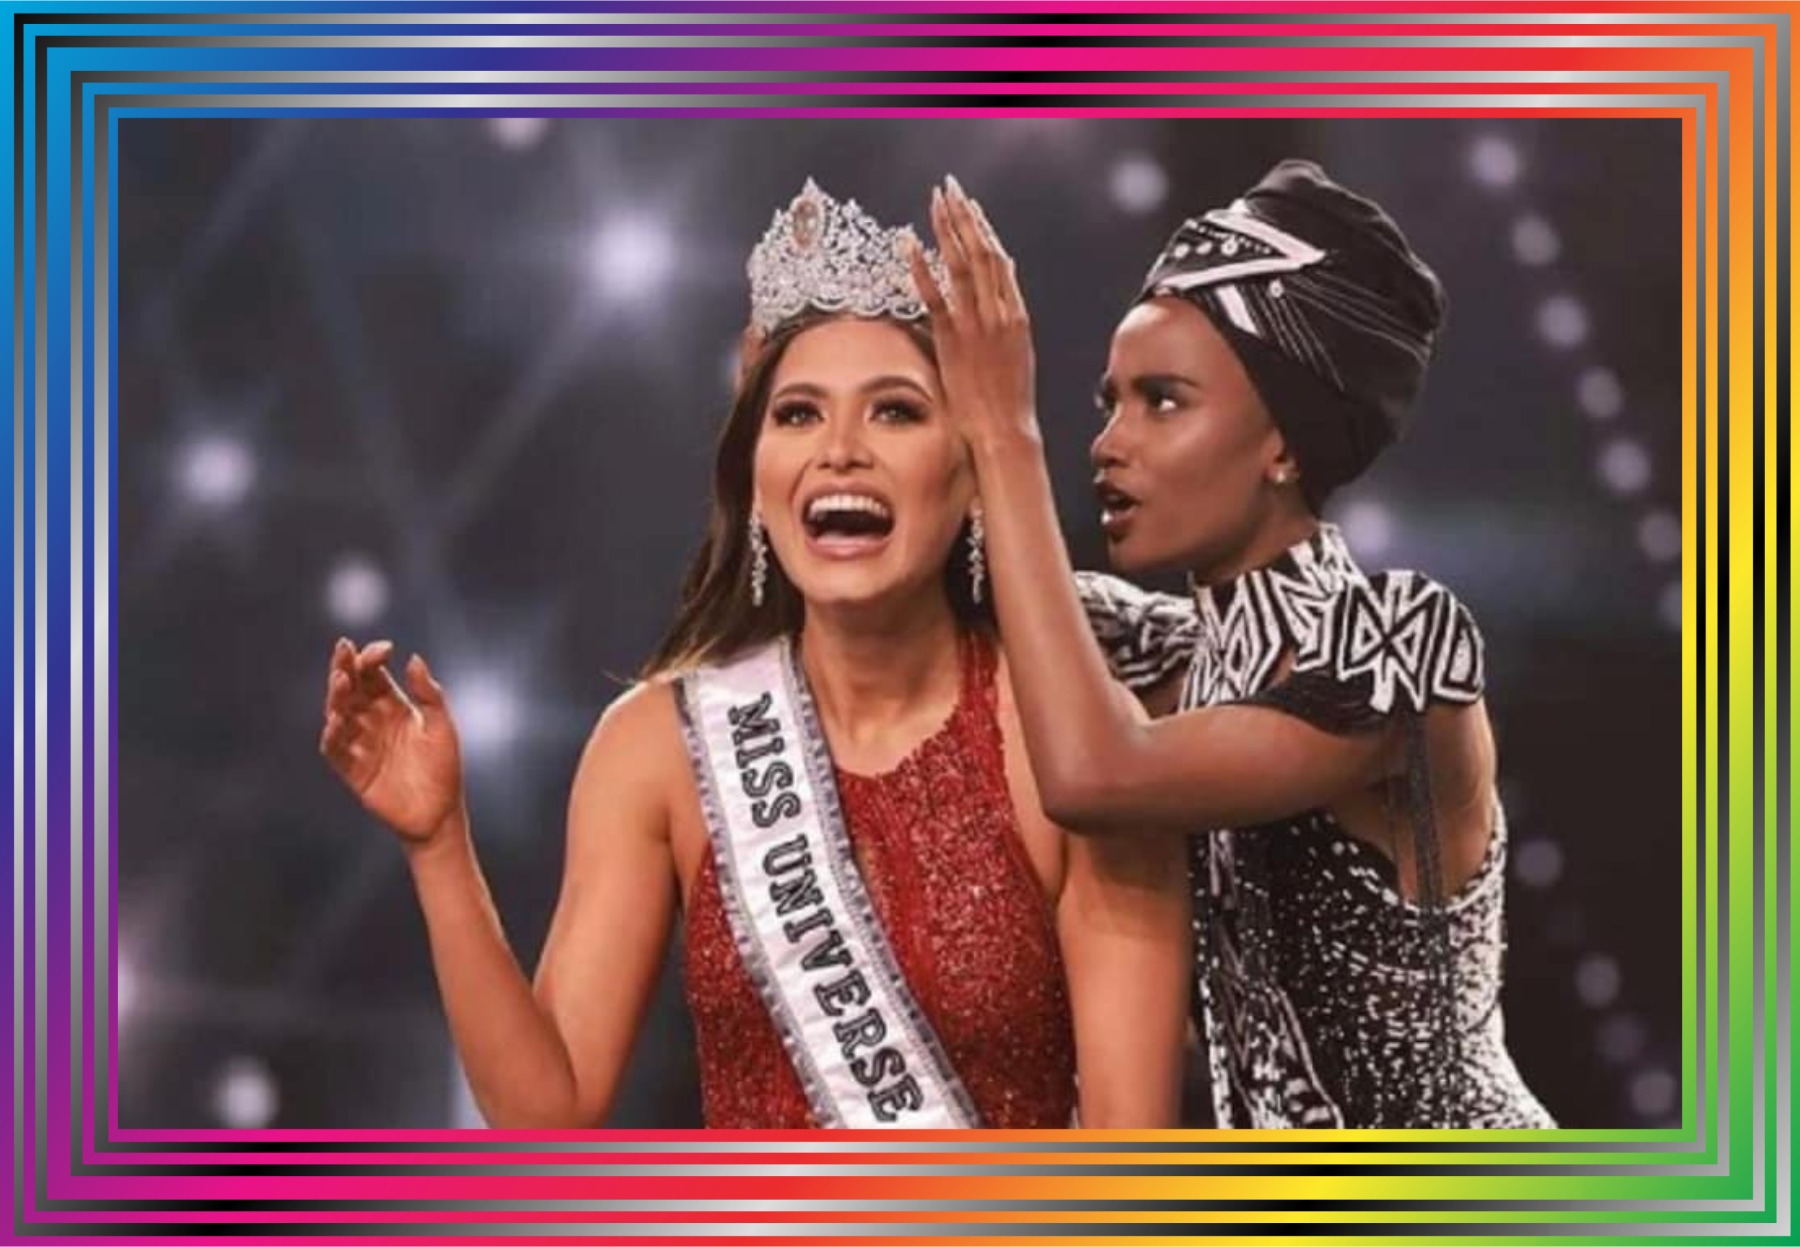 You are currently viewing “Miss Universe 2020 Pageant- Mexican Beauty Andrea Meza Wins The Crown”